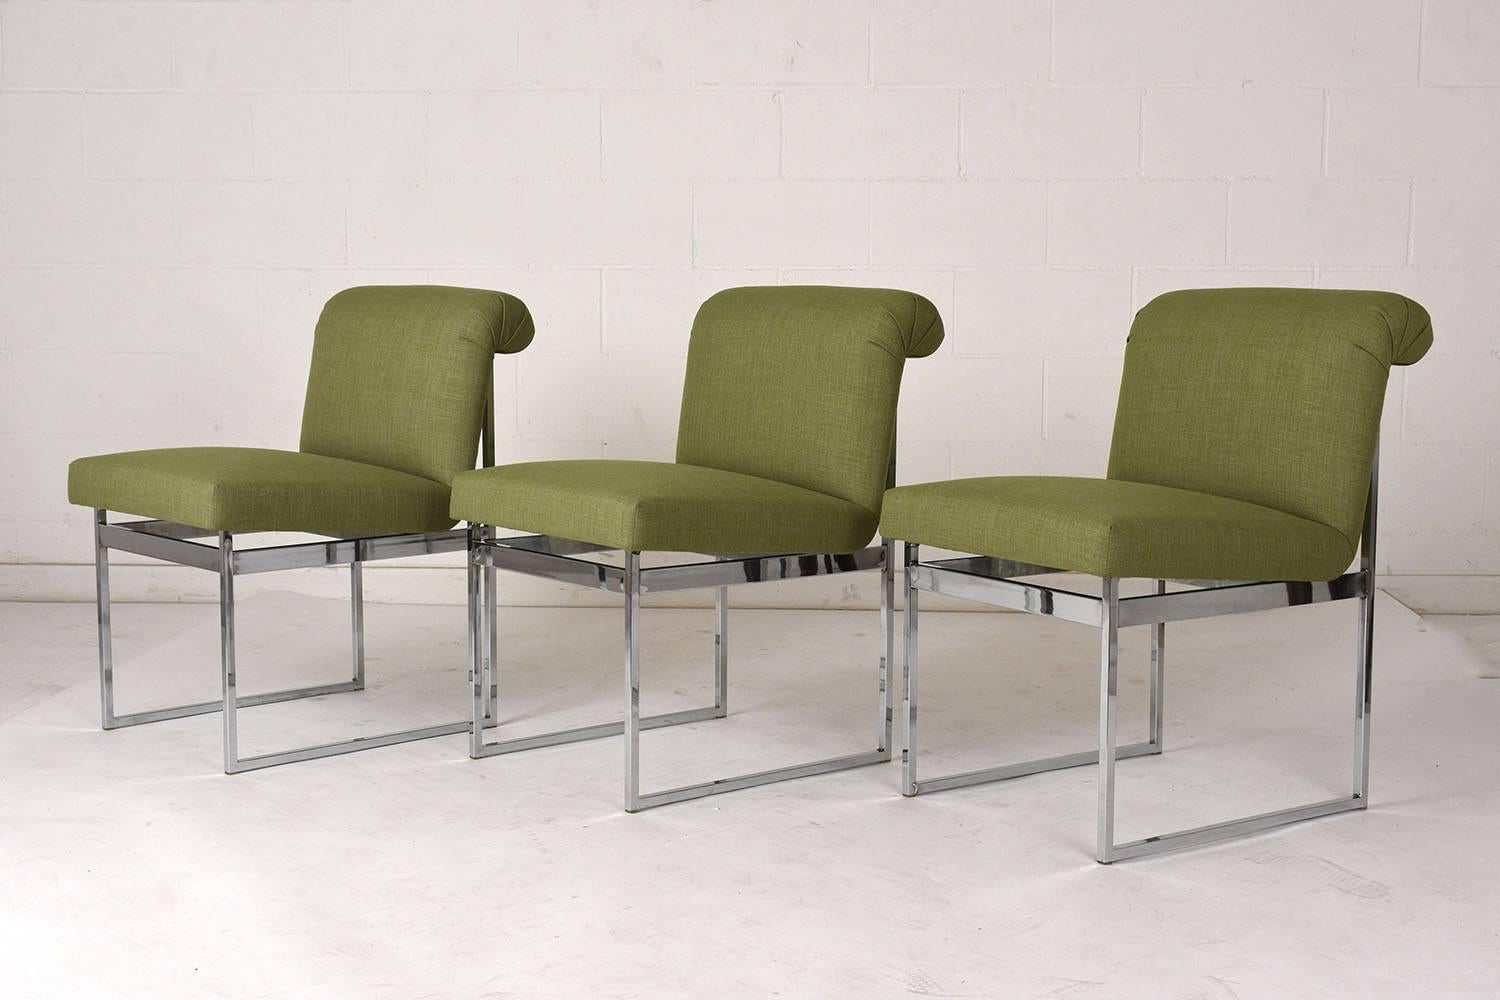 This set of six 1960s Mid-Century Modern style dining chairs are in the style of Milo Baughman. The chairs have a simple geometric chrome frame that pairs well with the upholstered seat. The seat has a unique shape with a scroll curved back and a